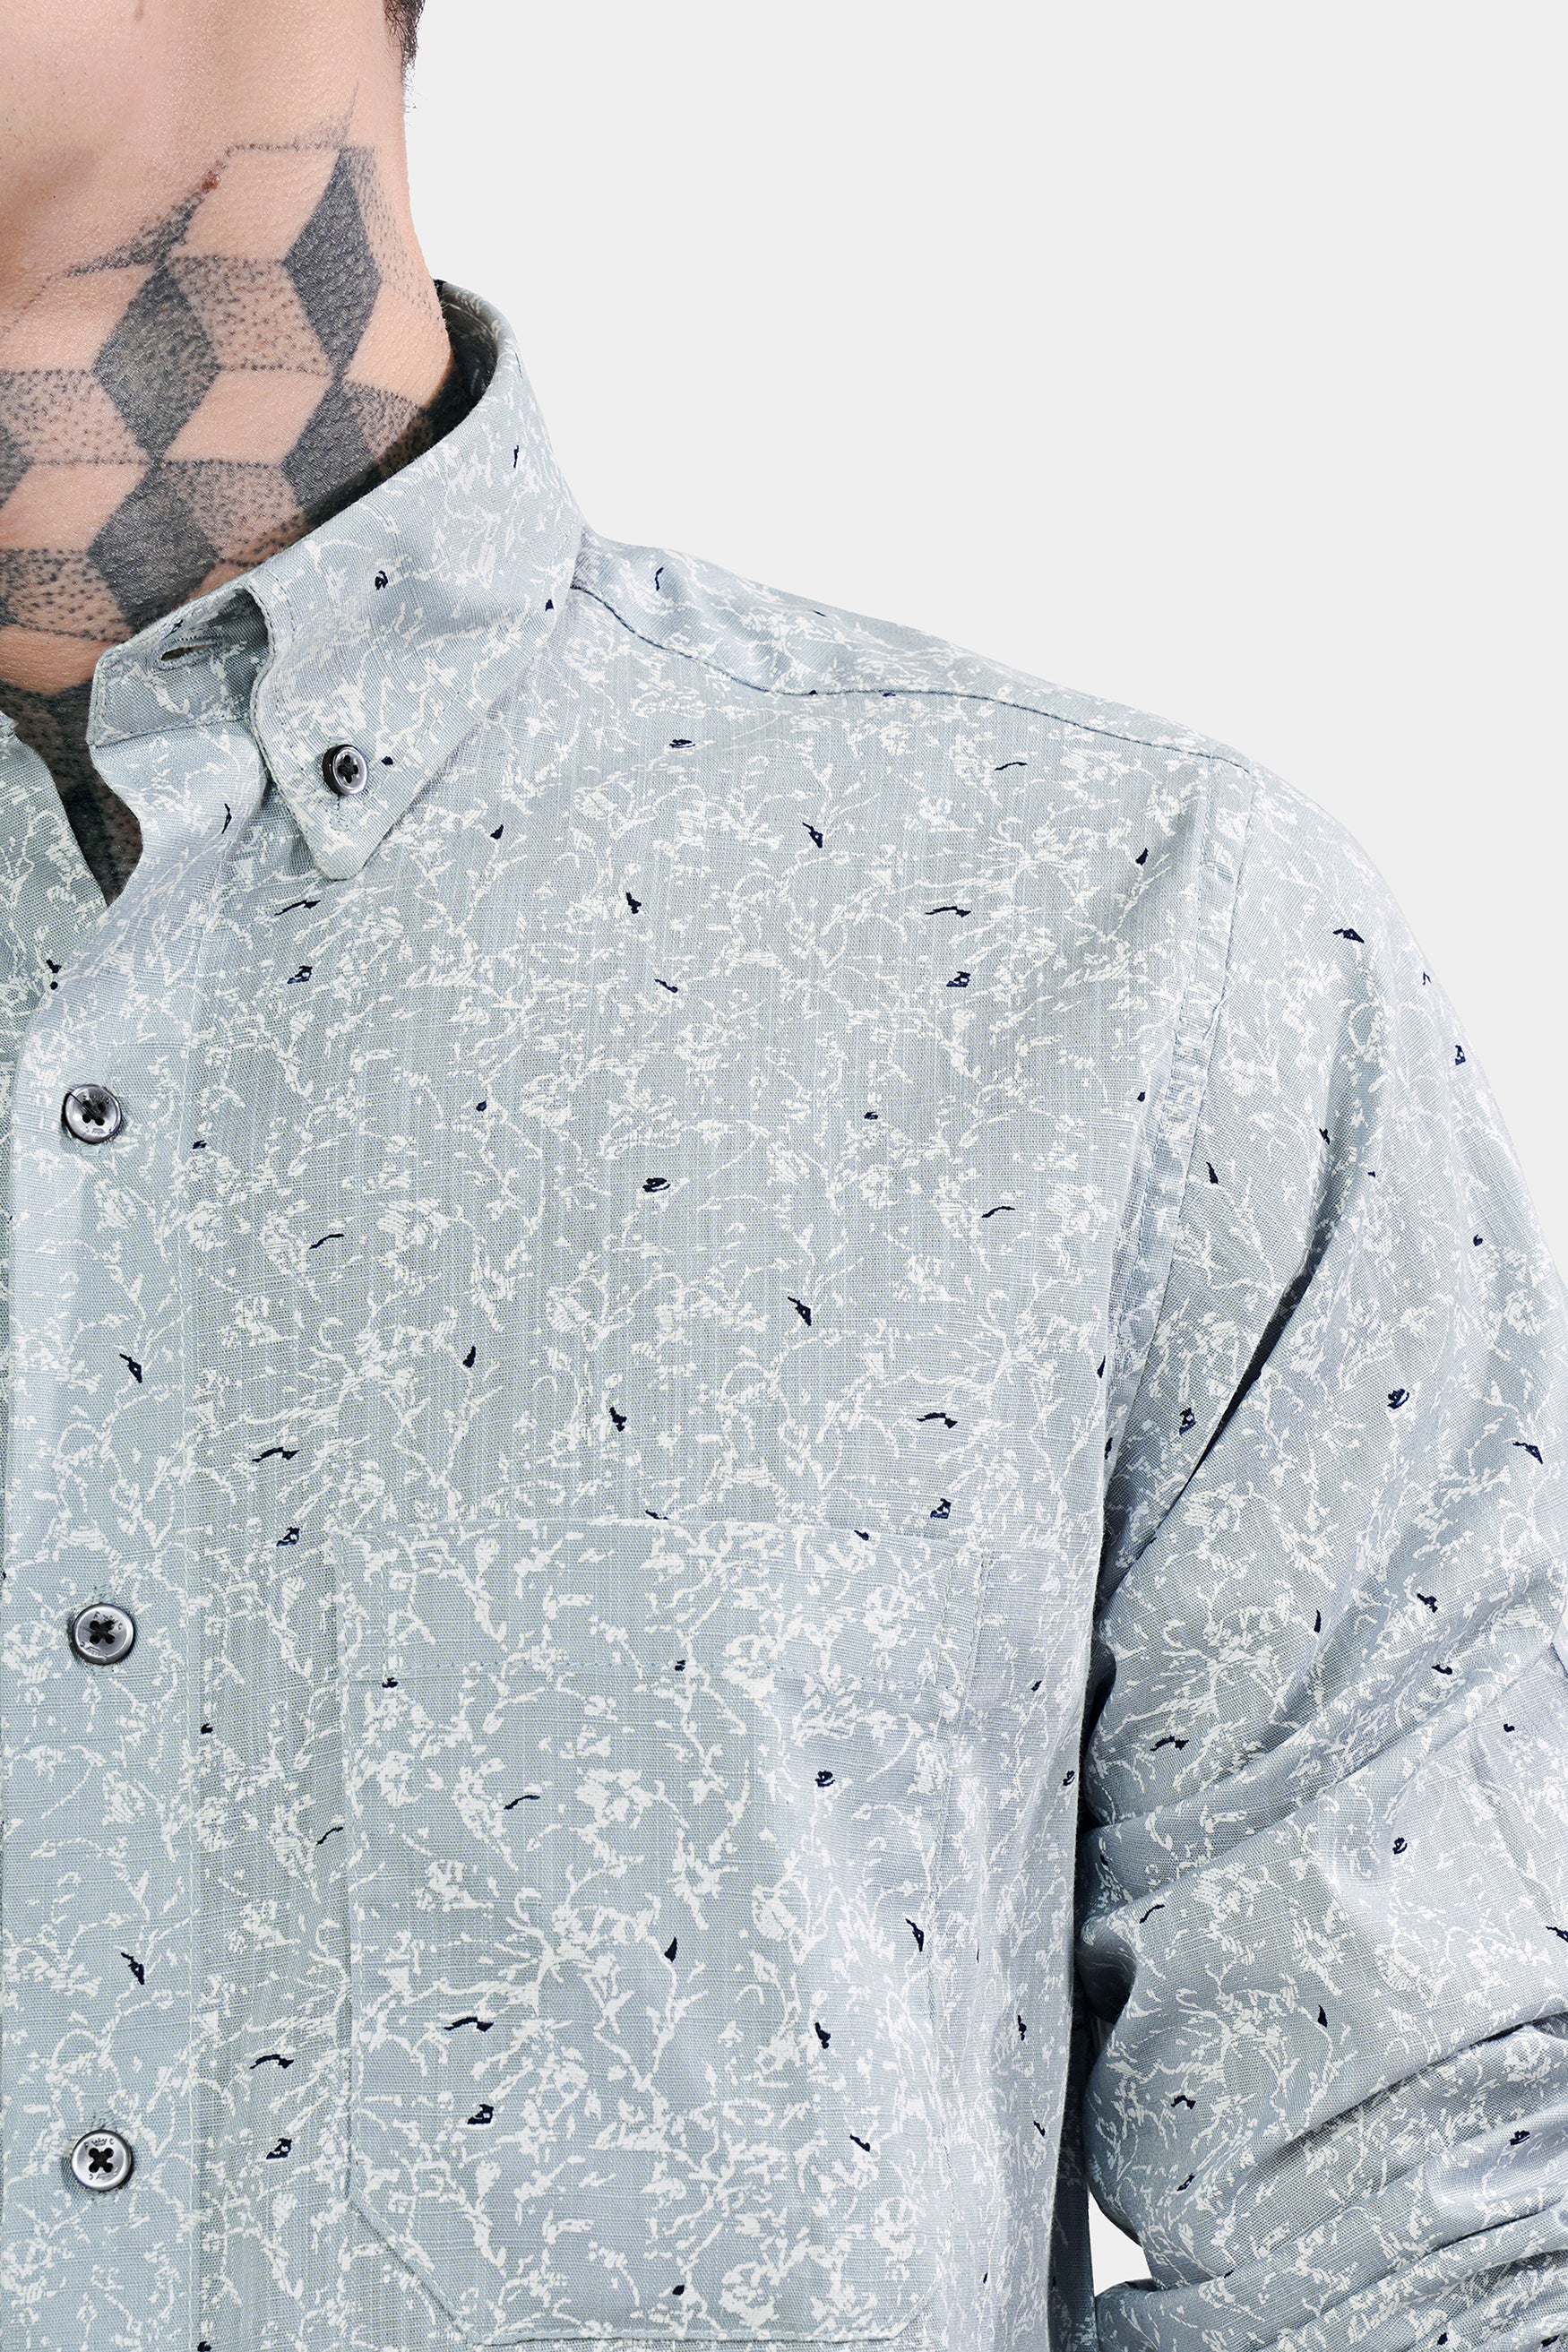 Bright White and Geyser Gray Printed Luxurious Linen Shirt